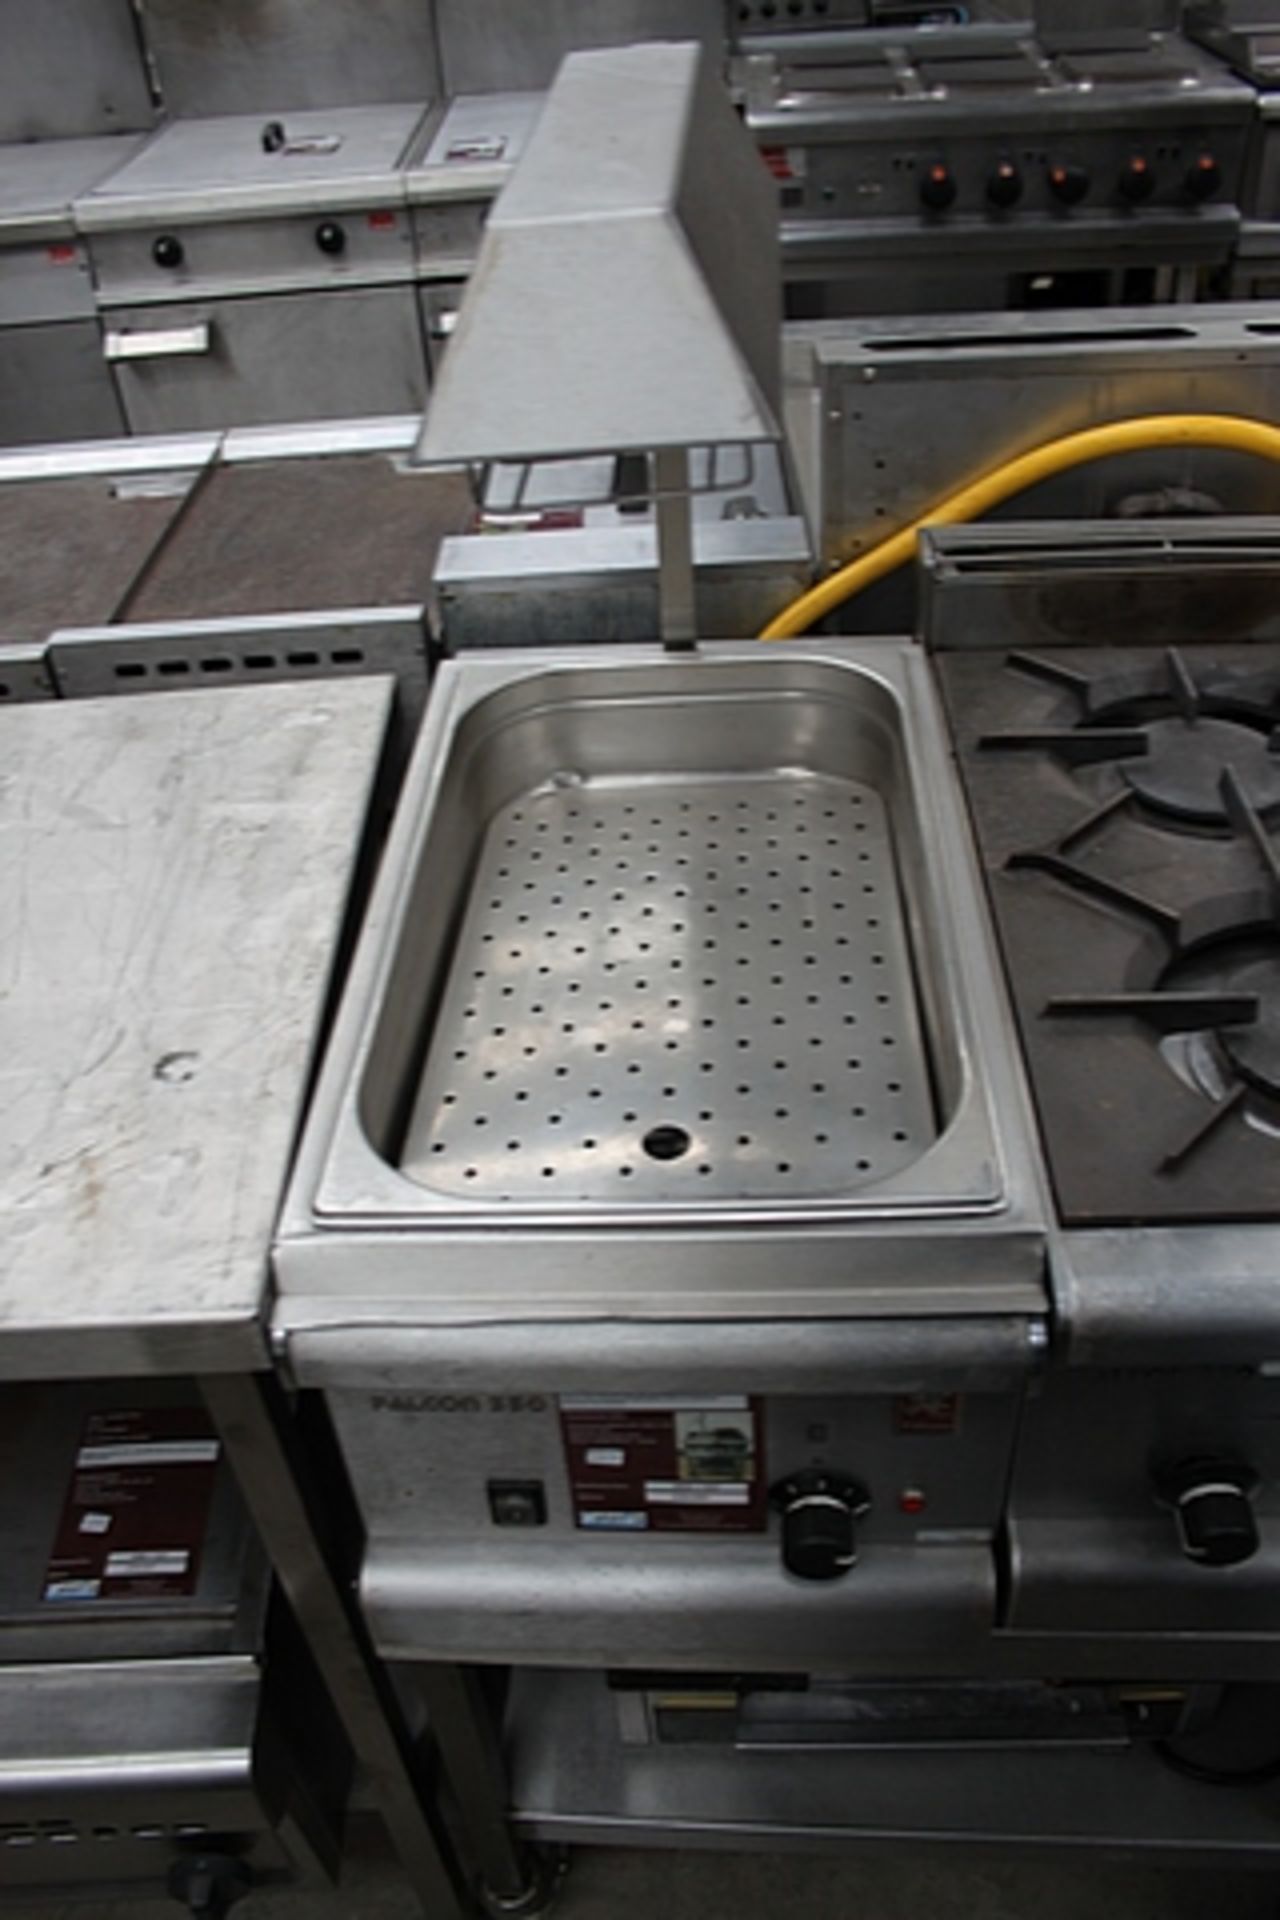 Falcon Chip Scuttle and 2 Burner Gas Top with stand 350 Series E350/48 and G350 Gas Top Keep chips